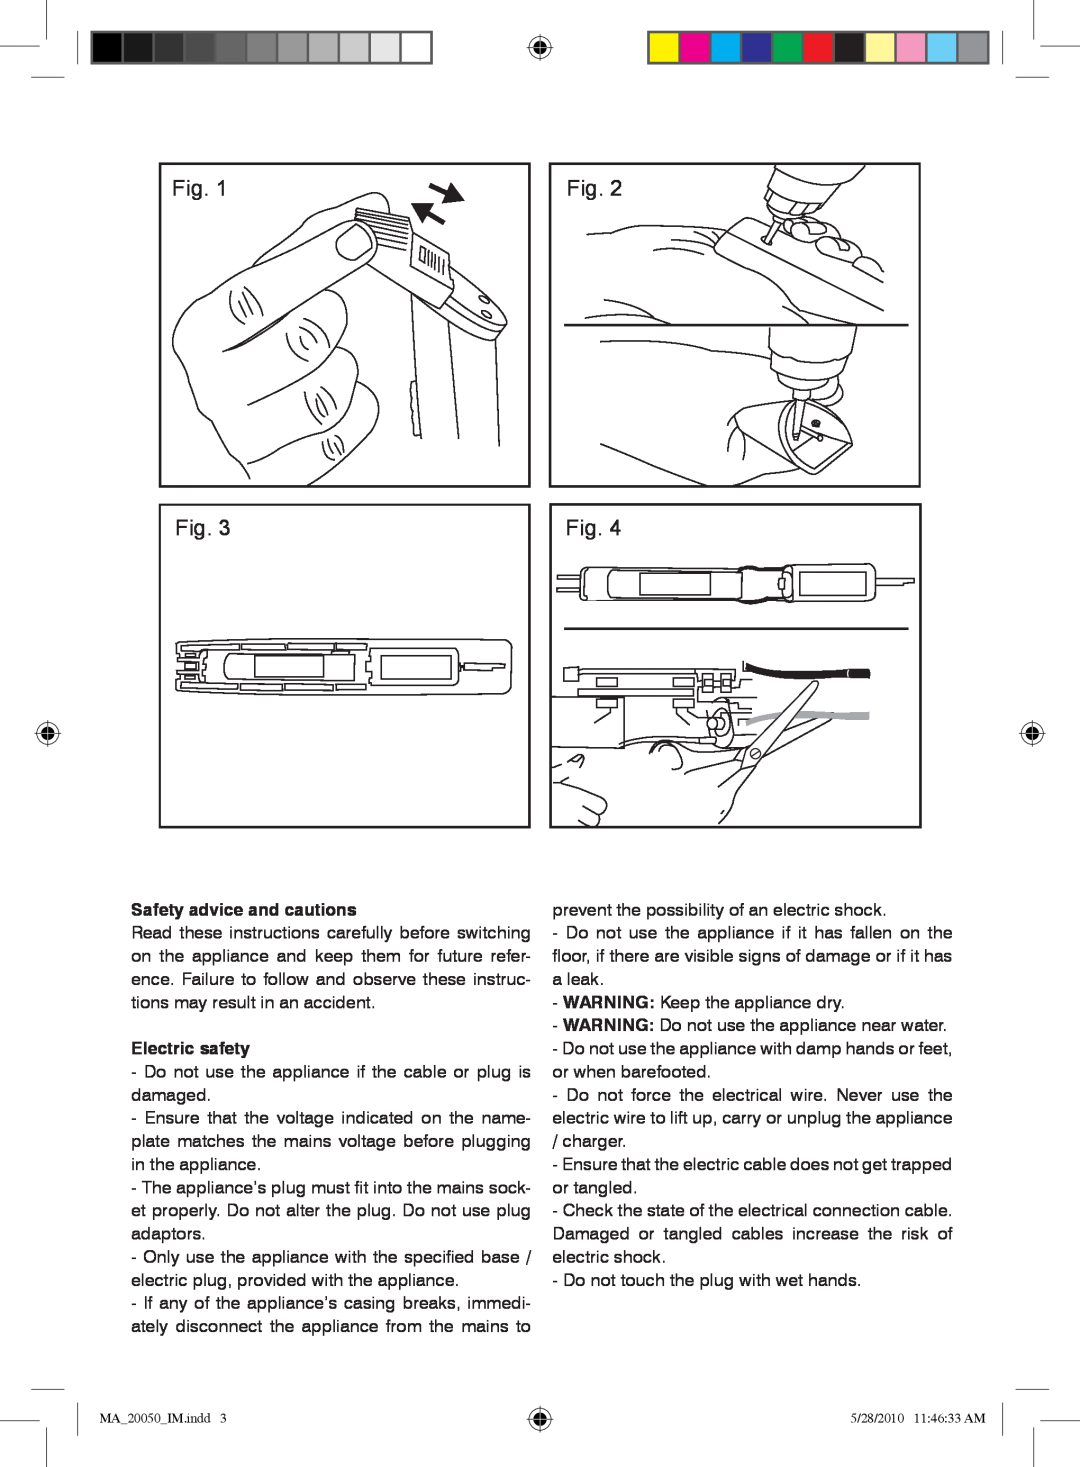 Mellerware MA20050 manual Safety advice and cautions, Electric safety 